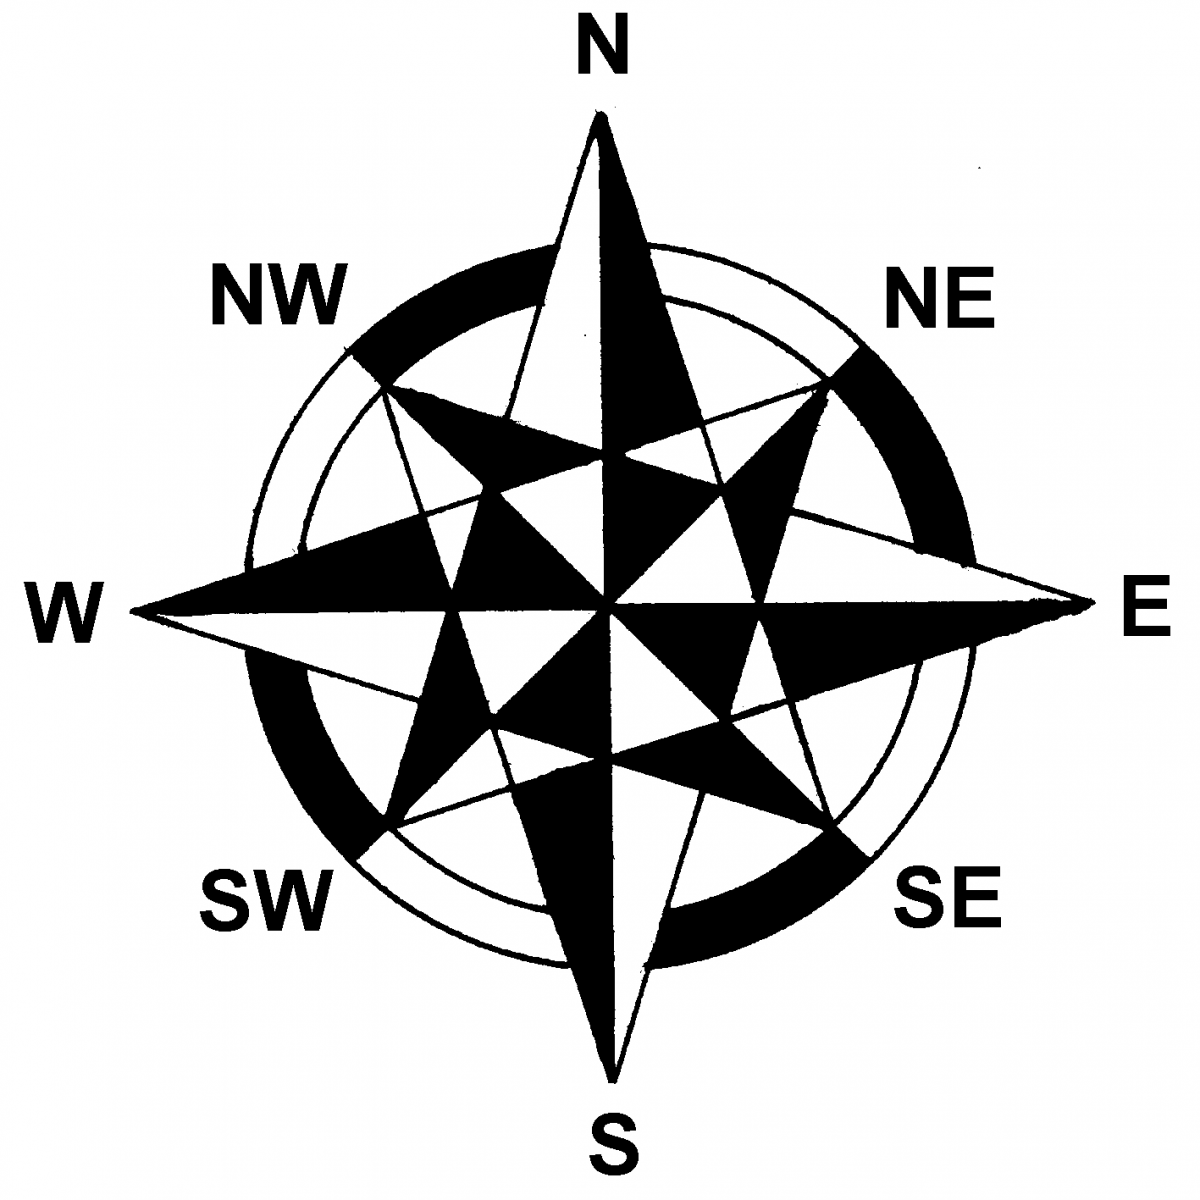 Free Compass., Download Free Clip Art, Free Clip Art on.